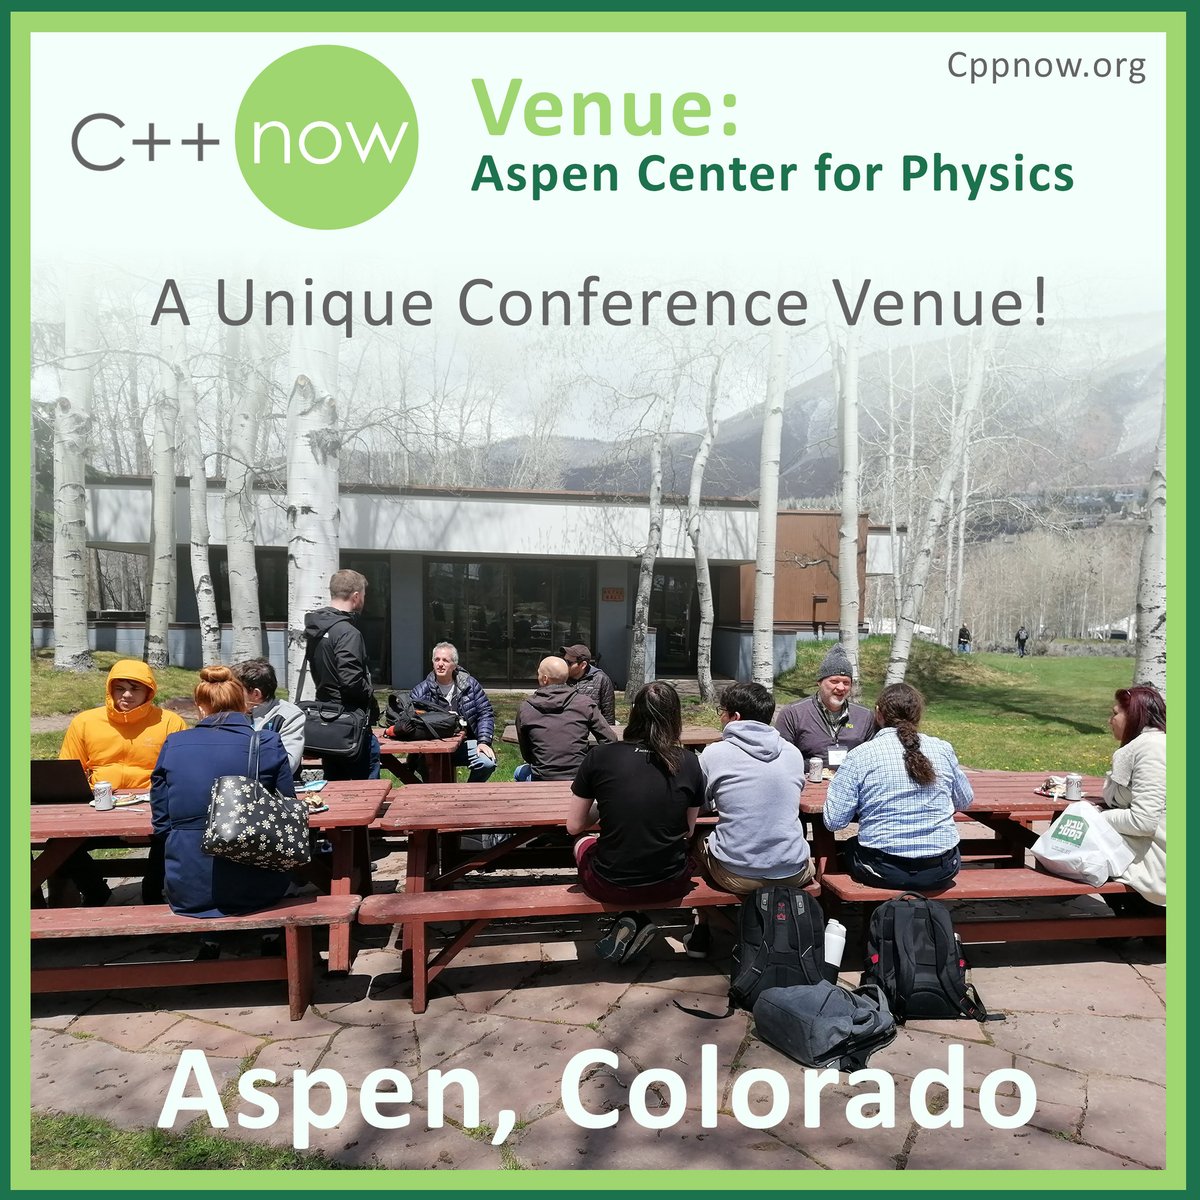 🌟 Calling all C++ developers! Register for C++Now, the premier conference happening in Aspen, Colorado. From April 29th to May 3rd 

Immerse yourself in C++ with talks, group chats, and lightning talks. 

Register today! cppnow.org/registration/

#cpp #cplusplus